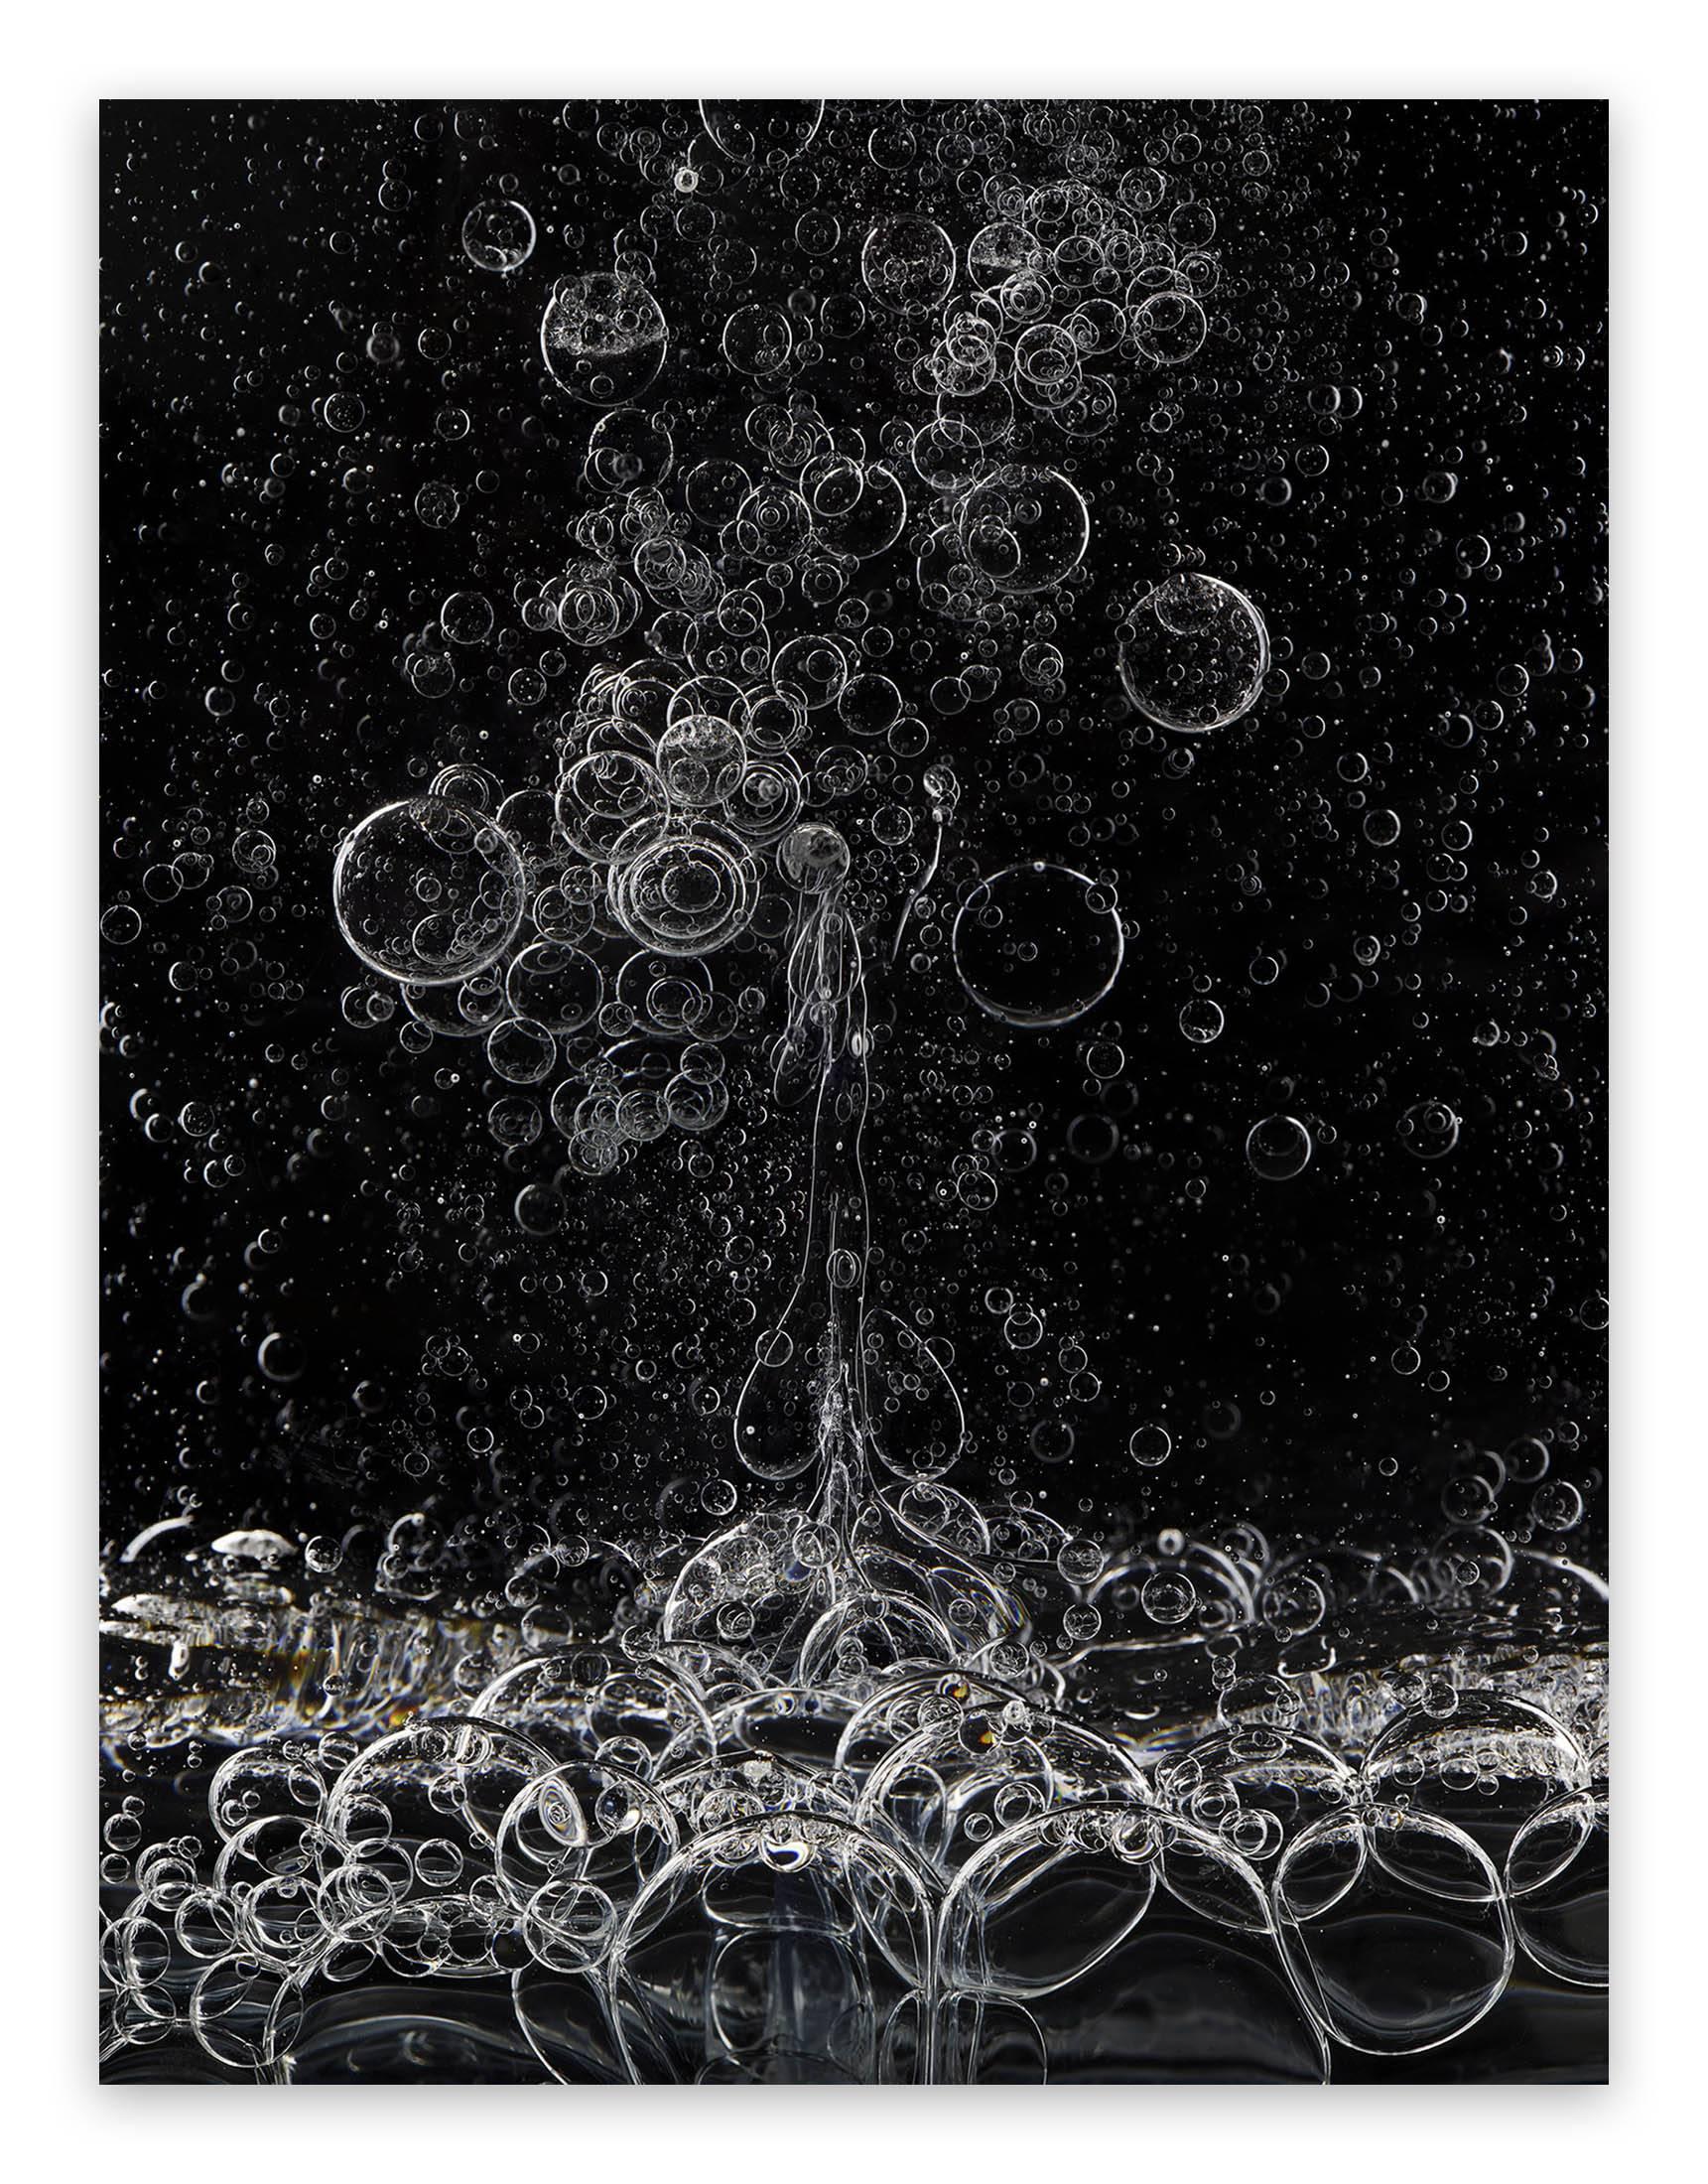 Seb Janiak - Gravity - Bulle d'air 04 (Abstract Photography) For Sale ...